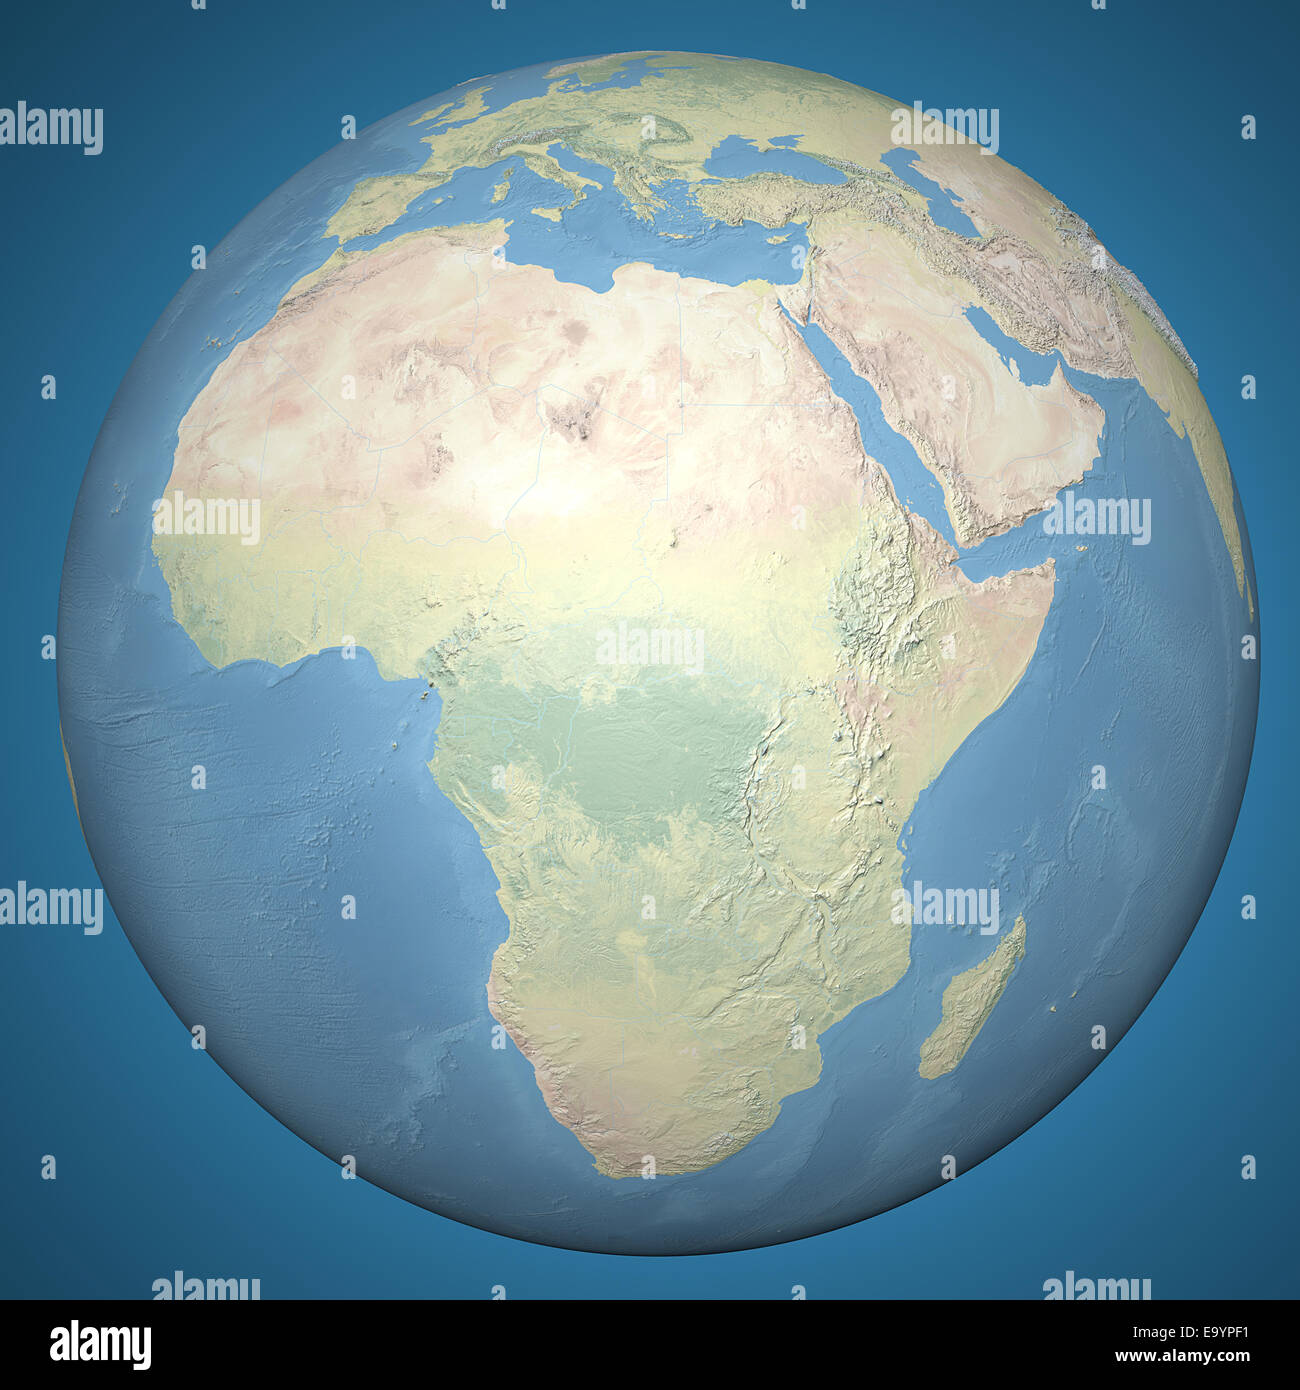 Earth model planet featuring Africa and middle eastern countries surrounded by blue ocean and clouds isolated on blue Stock Photo